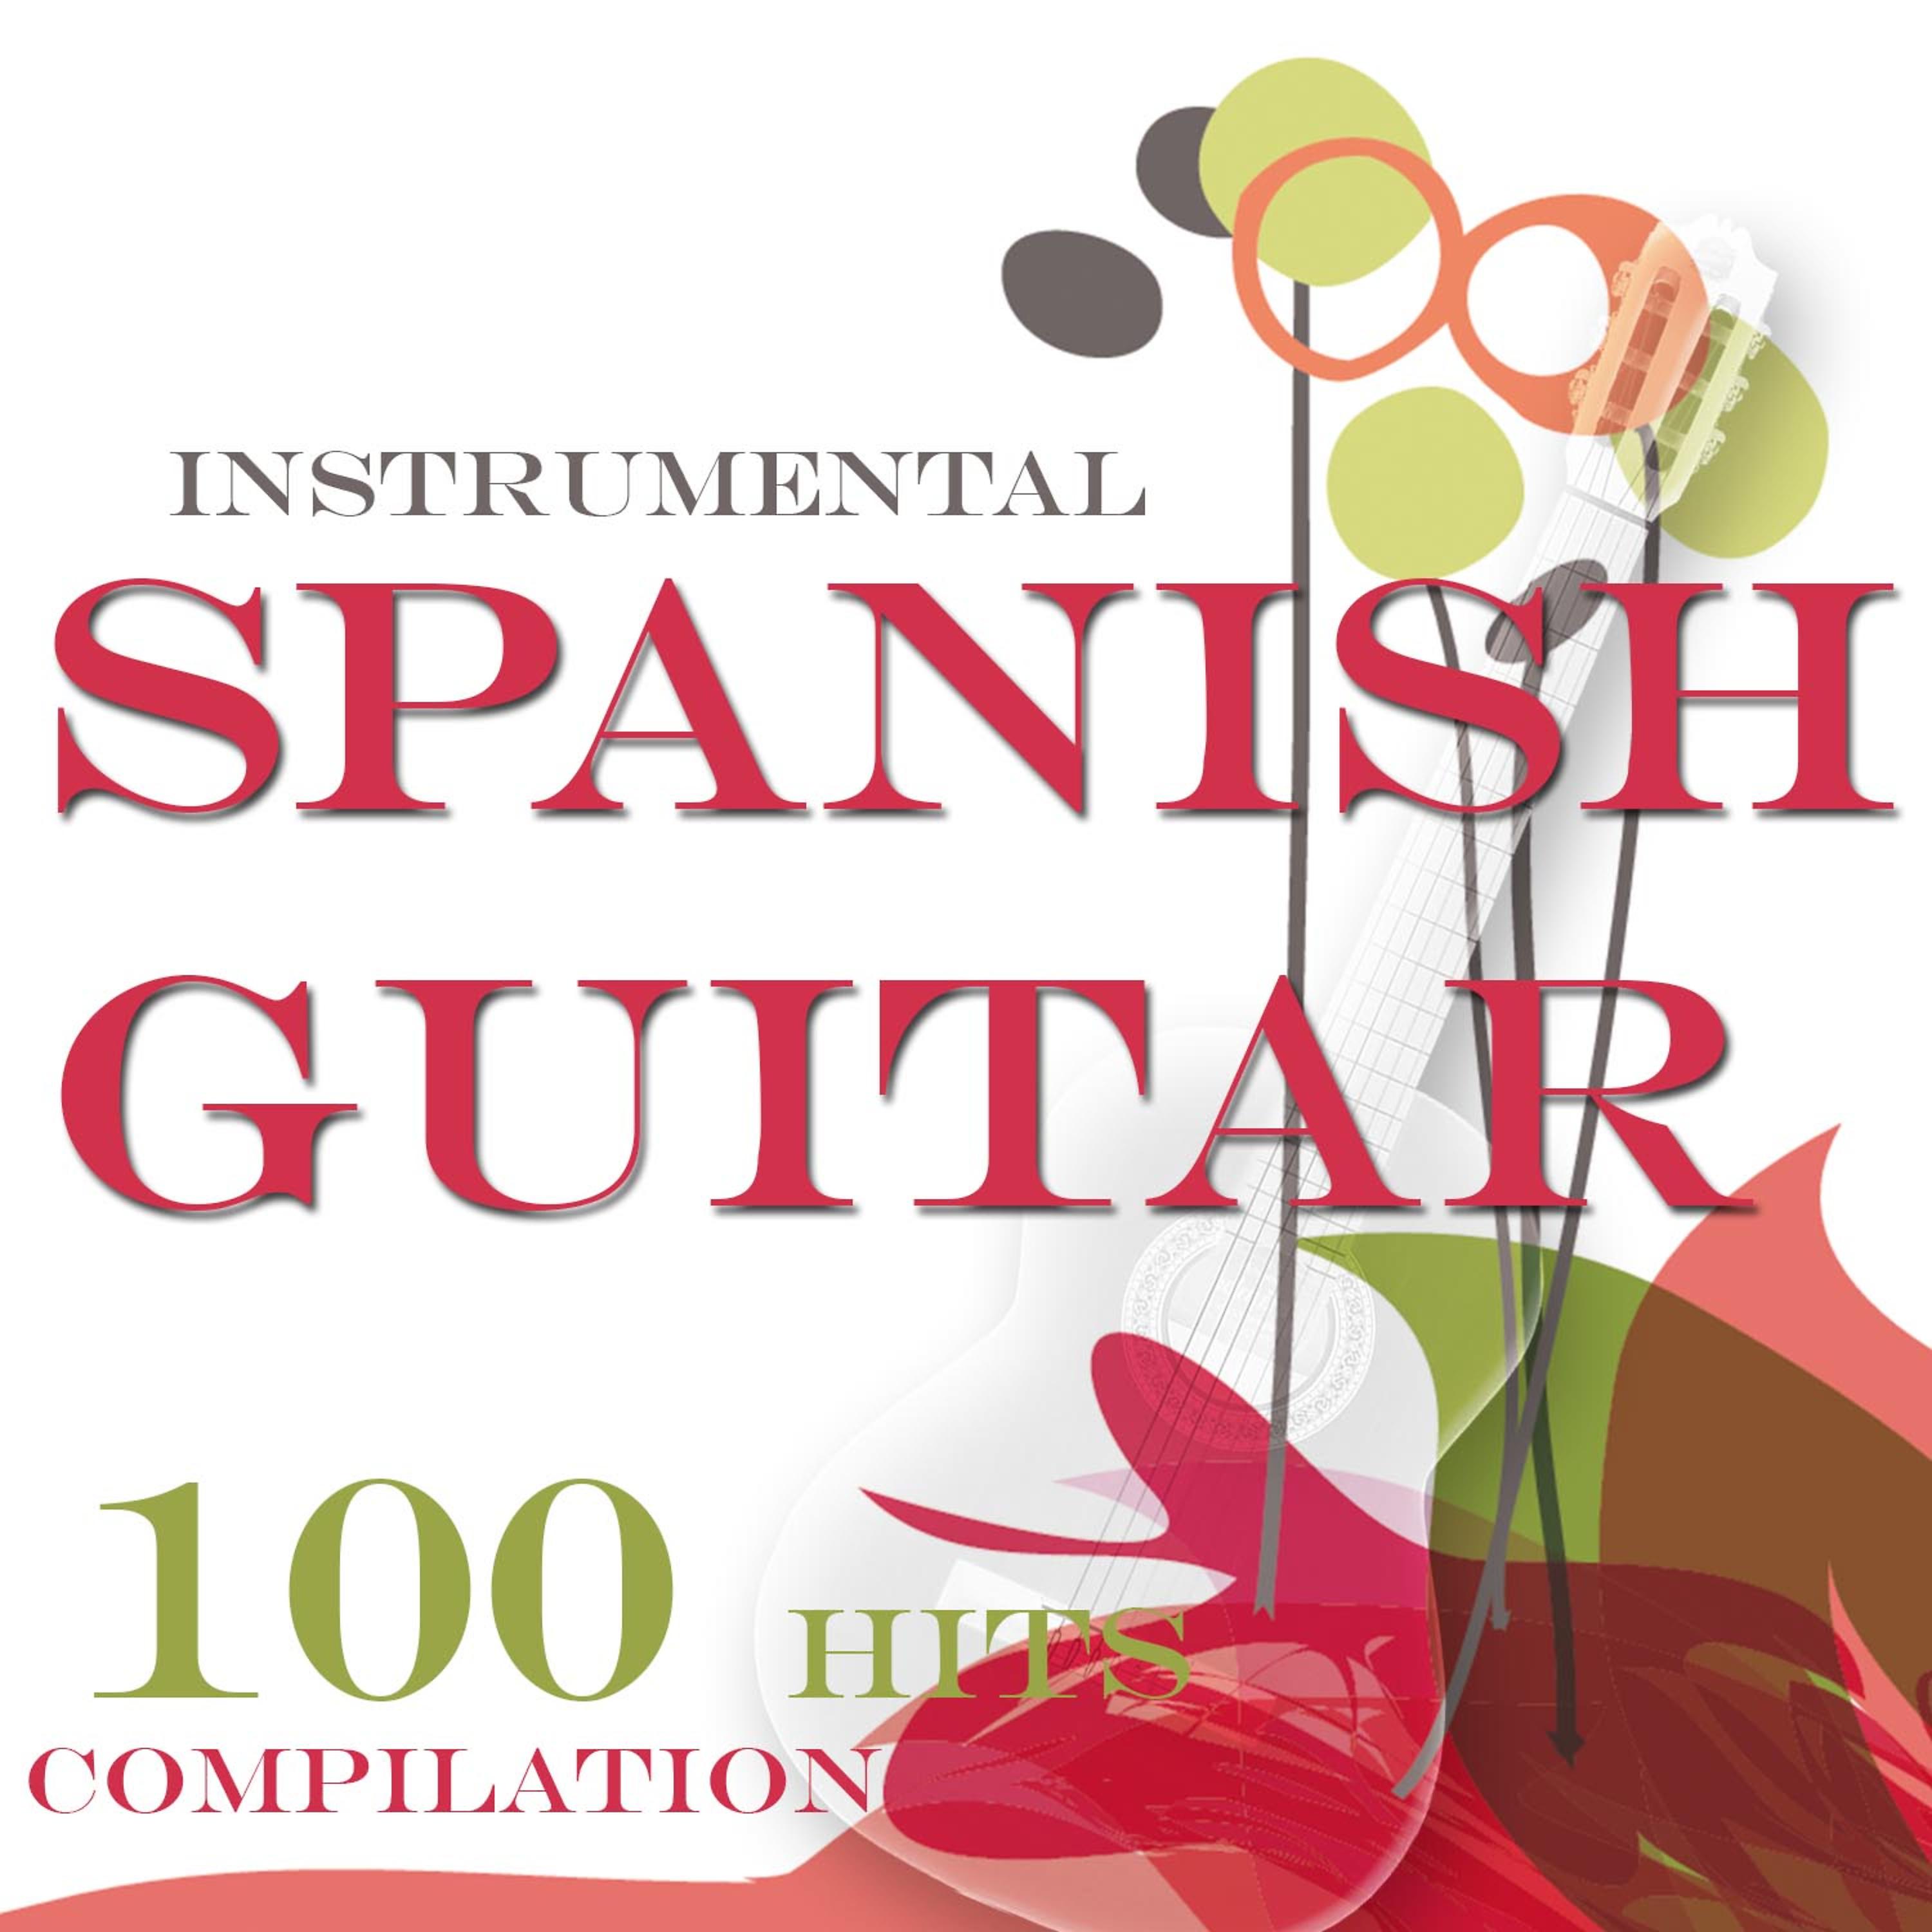 Постер альбома Instrumental Spanish Guitar Compilation (Guitarra Española) - For New Age, Chill out, Lounge and Relax Ambient